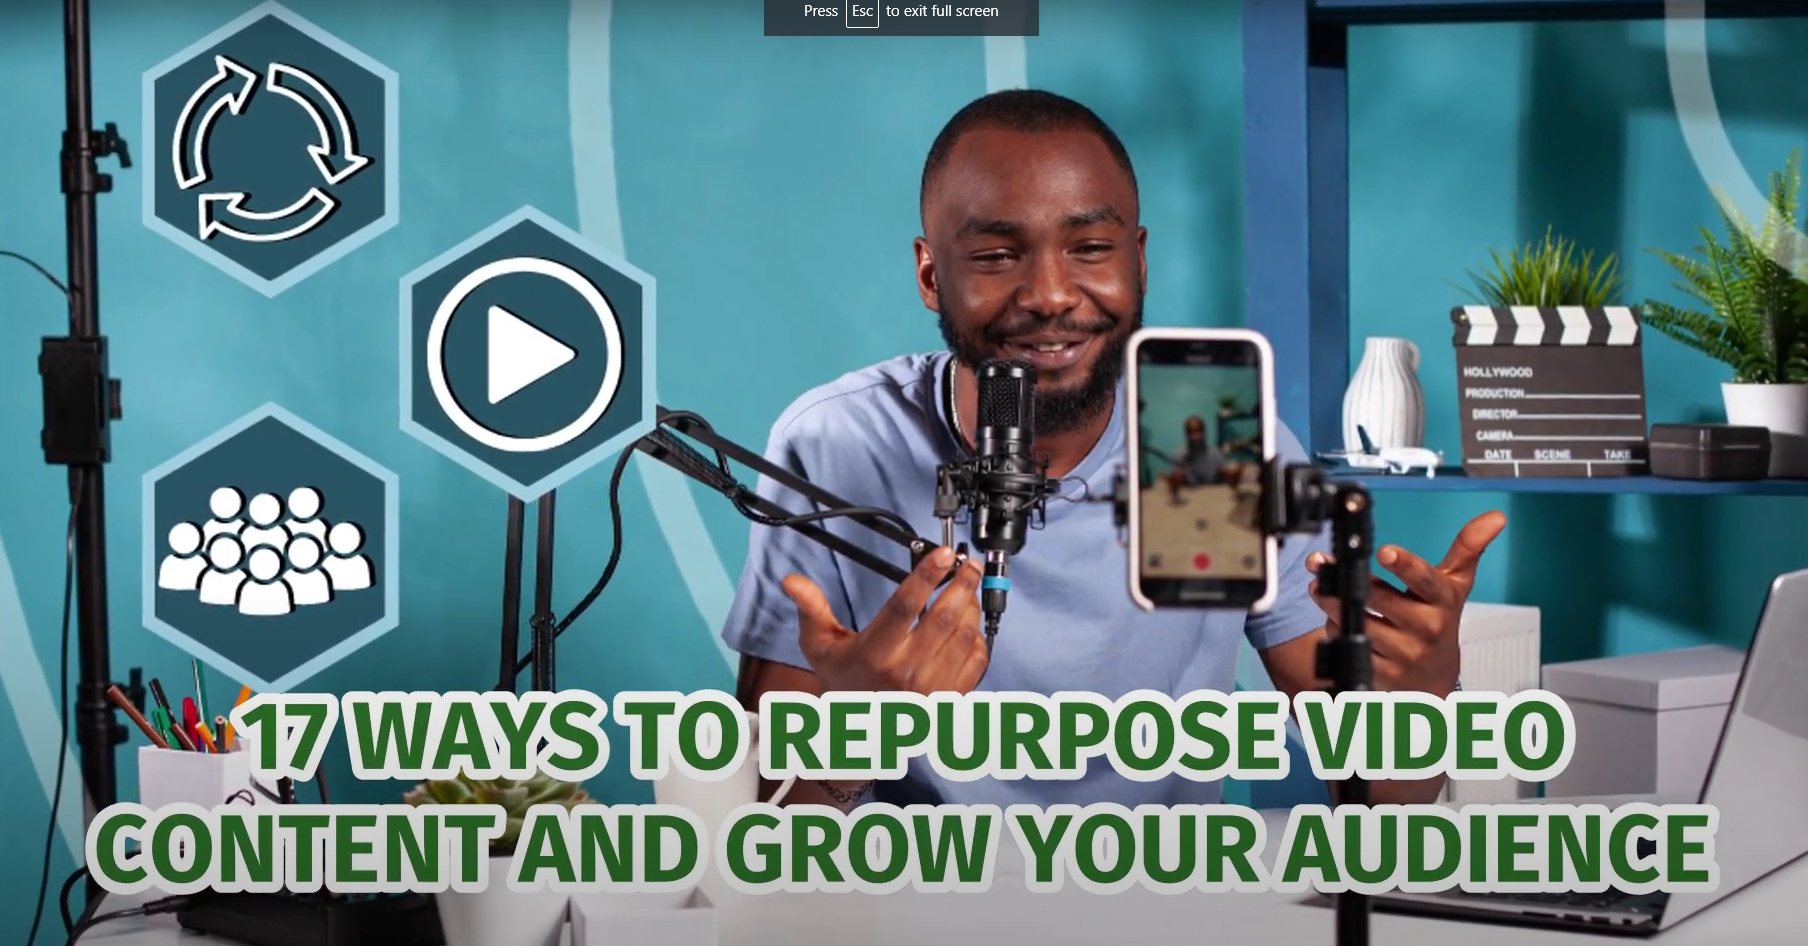 17 Ways to Repurpose Video Content and Grow Your Audience